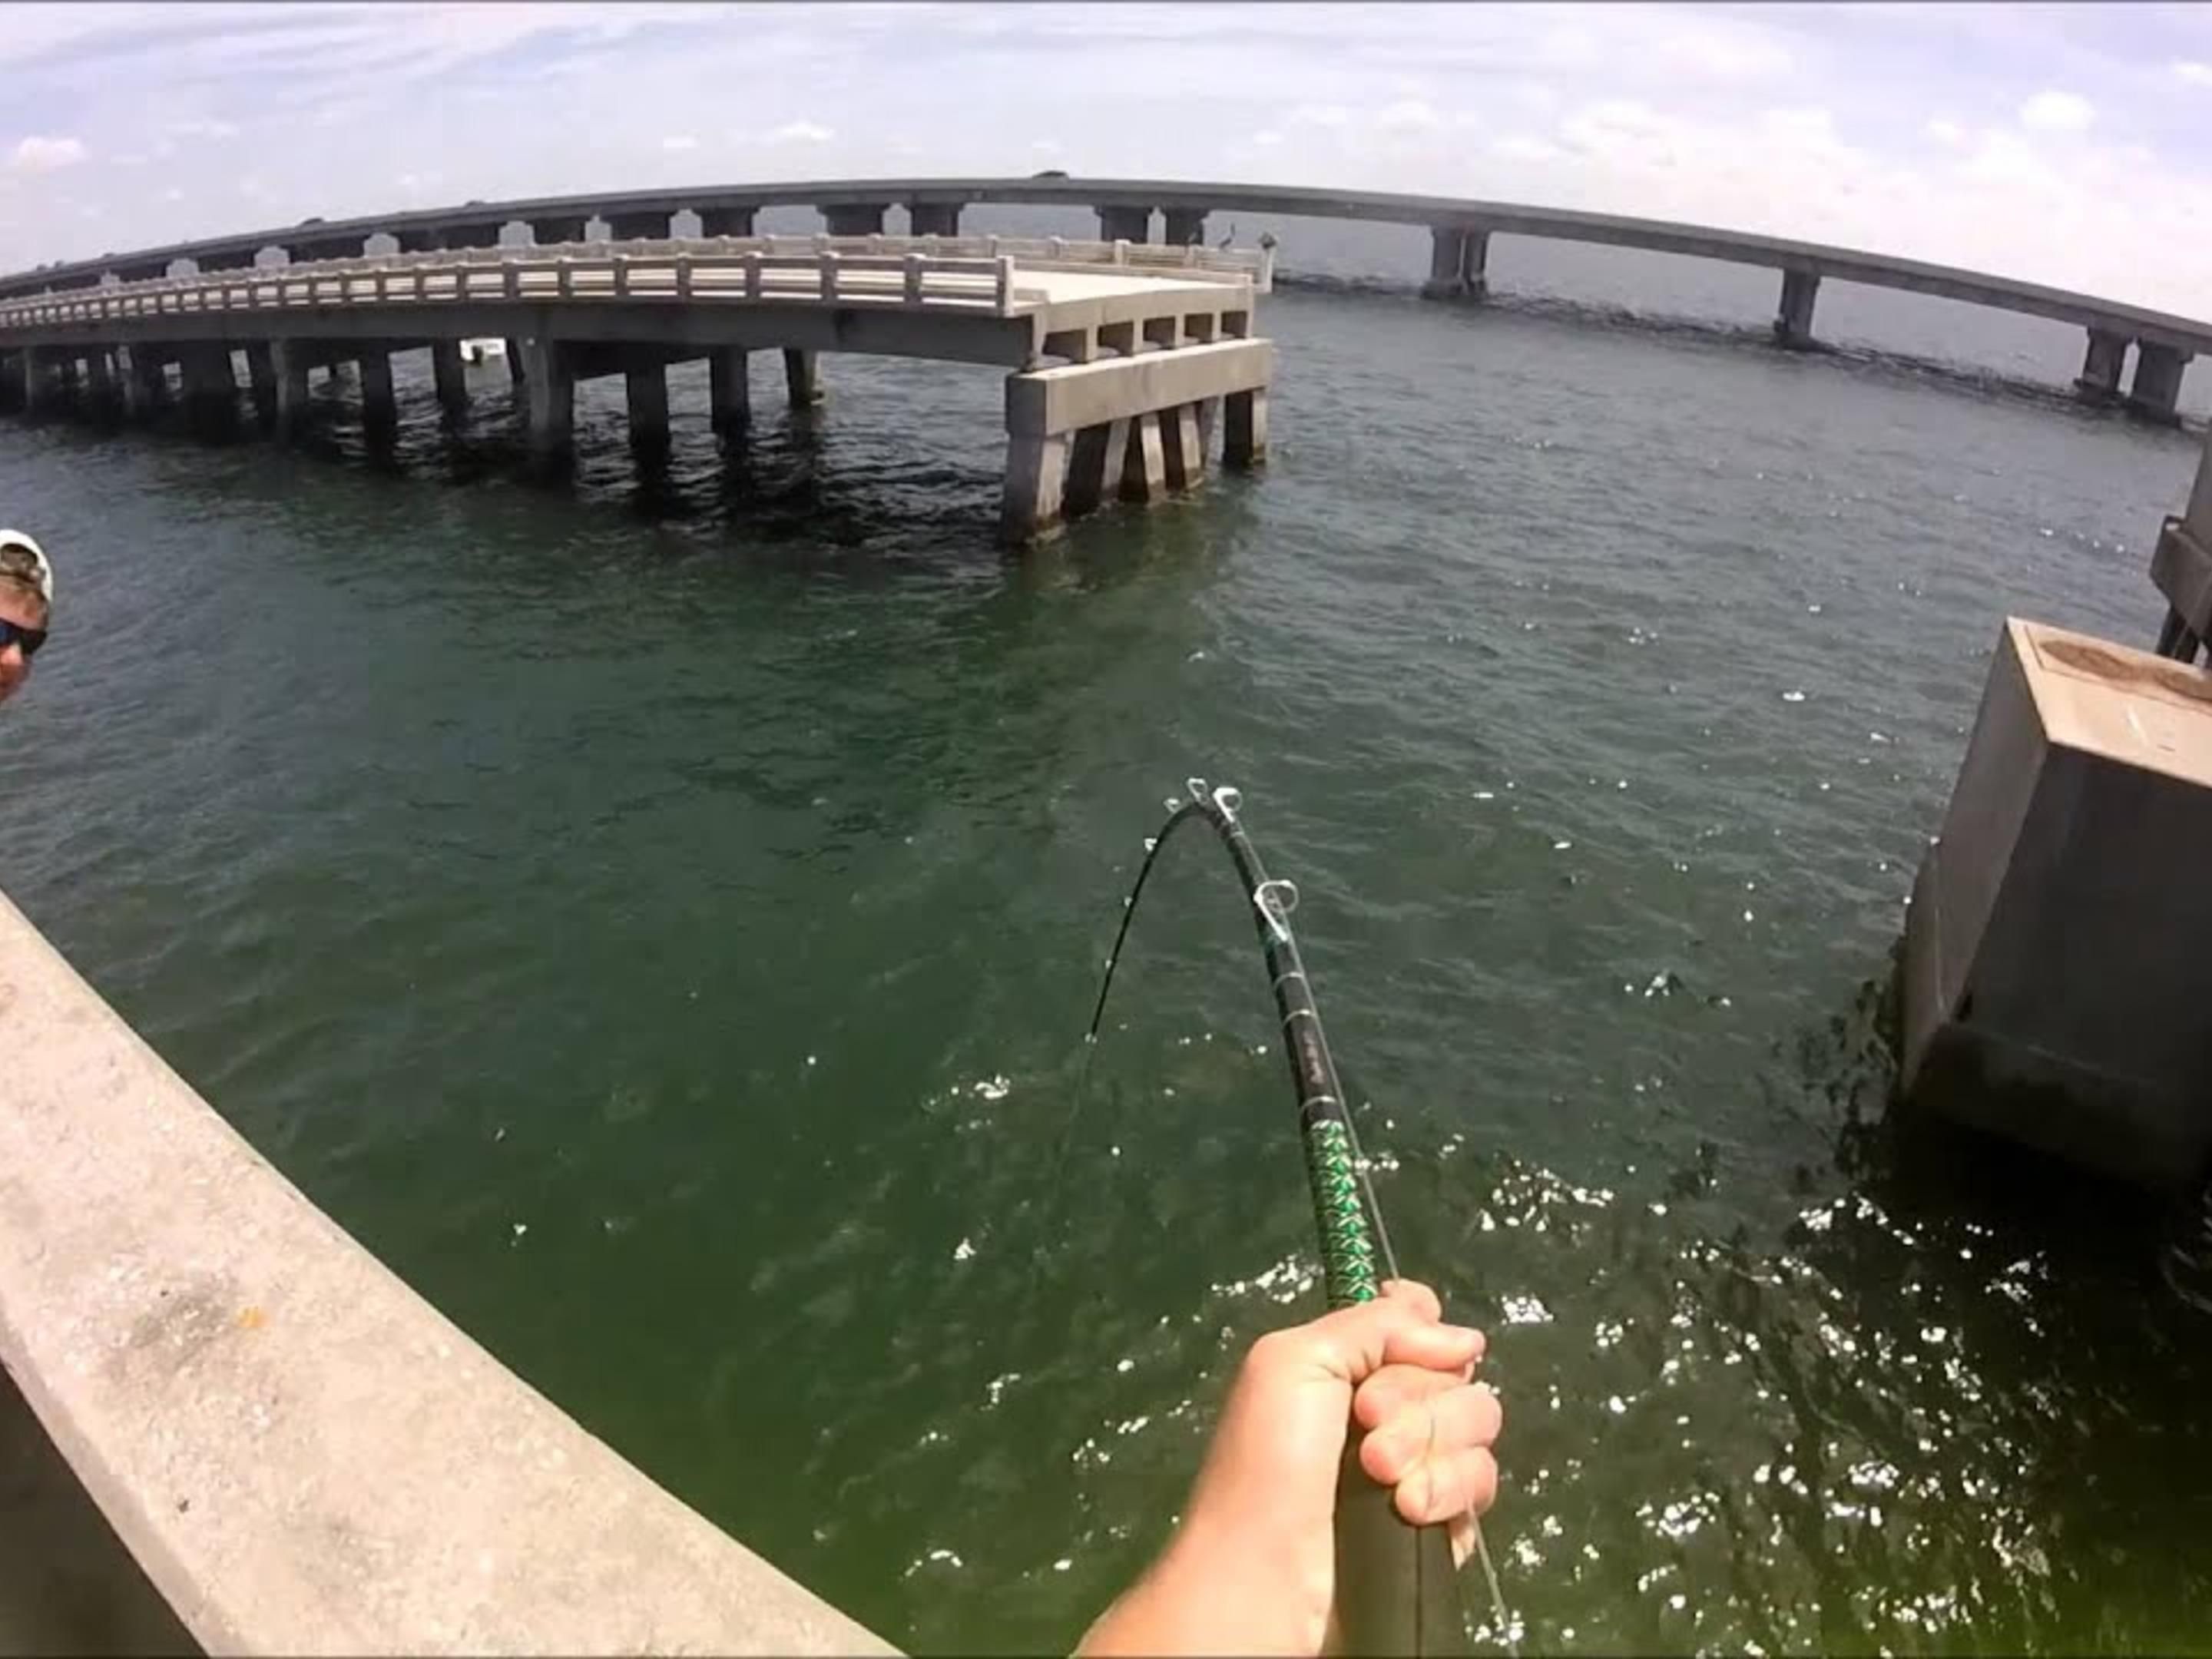 When the new Sunshine Skyway Bridge was built over Tampa Bay, connecting St. Petersburg with Sarasota, the old bridge was turned into the world's longest fishing pier.
Anglers love being able to park their cars within a few feet of their favorite fishing spot. 